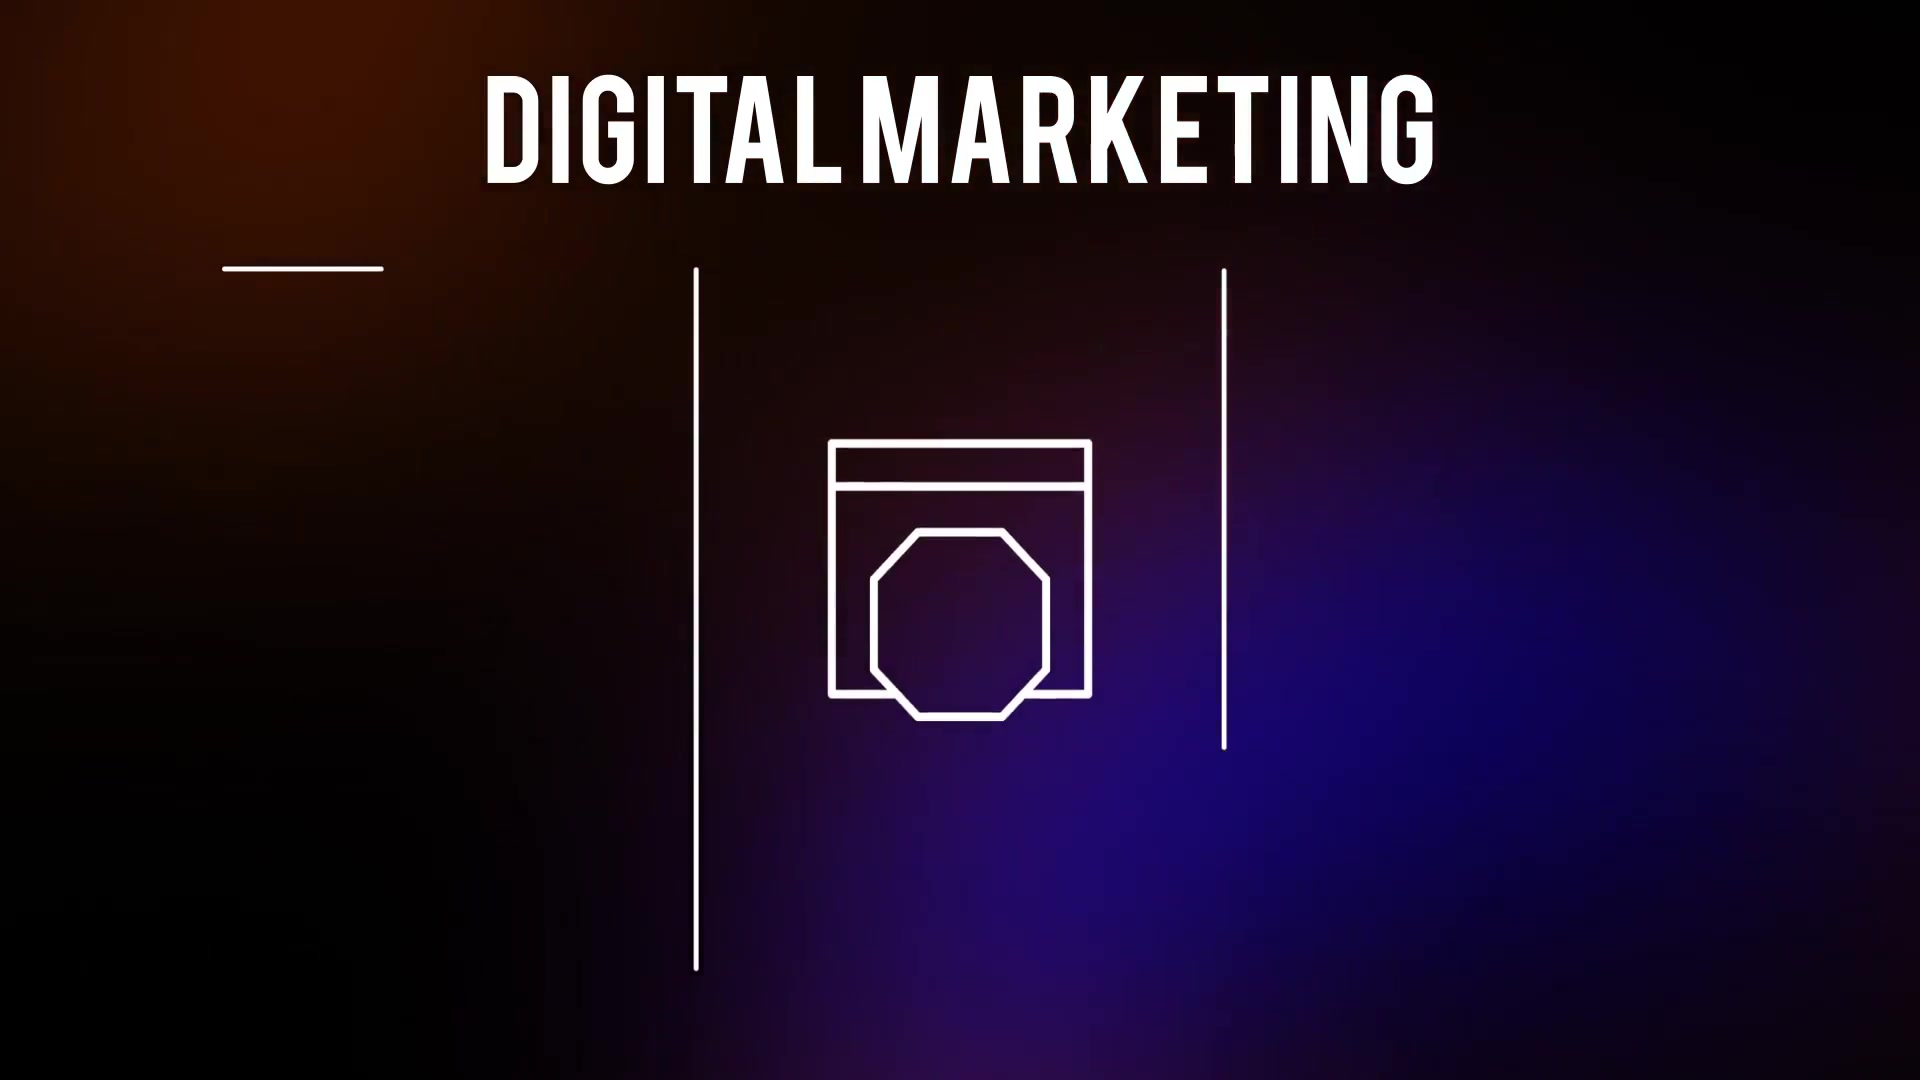 Digital Marketing 25 Outline Icons - Download Videohive 23194931